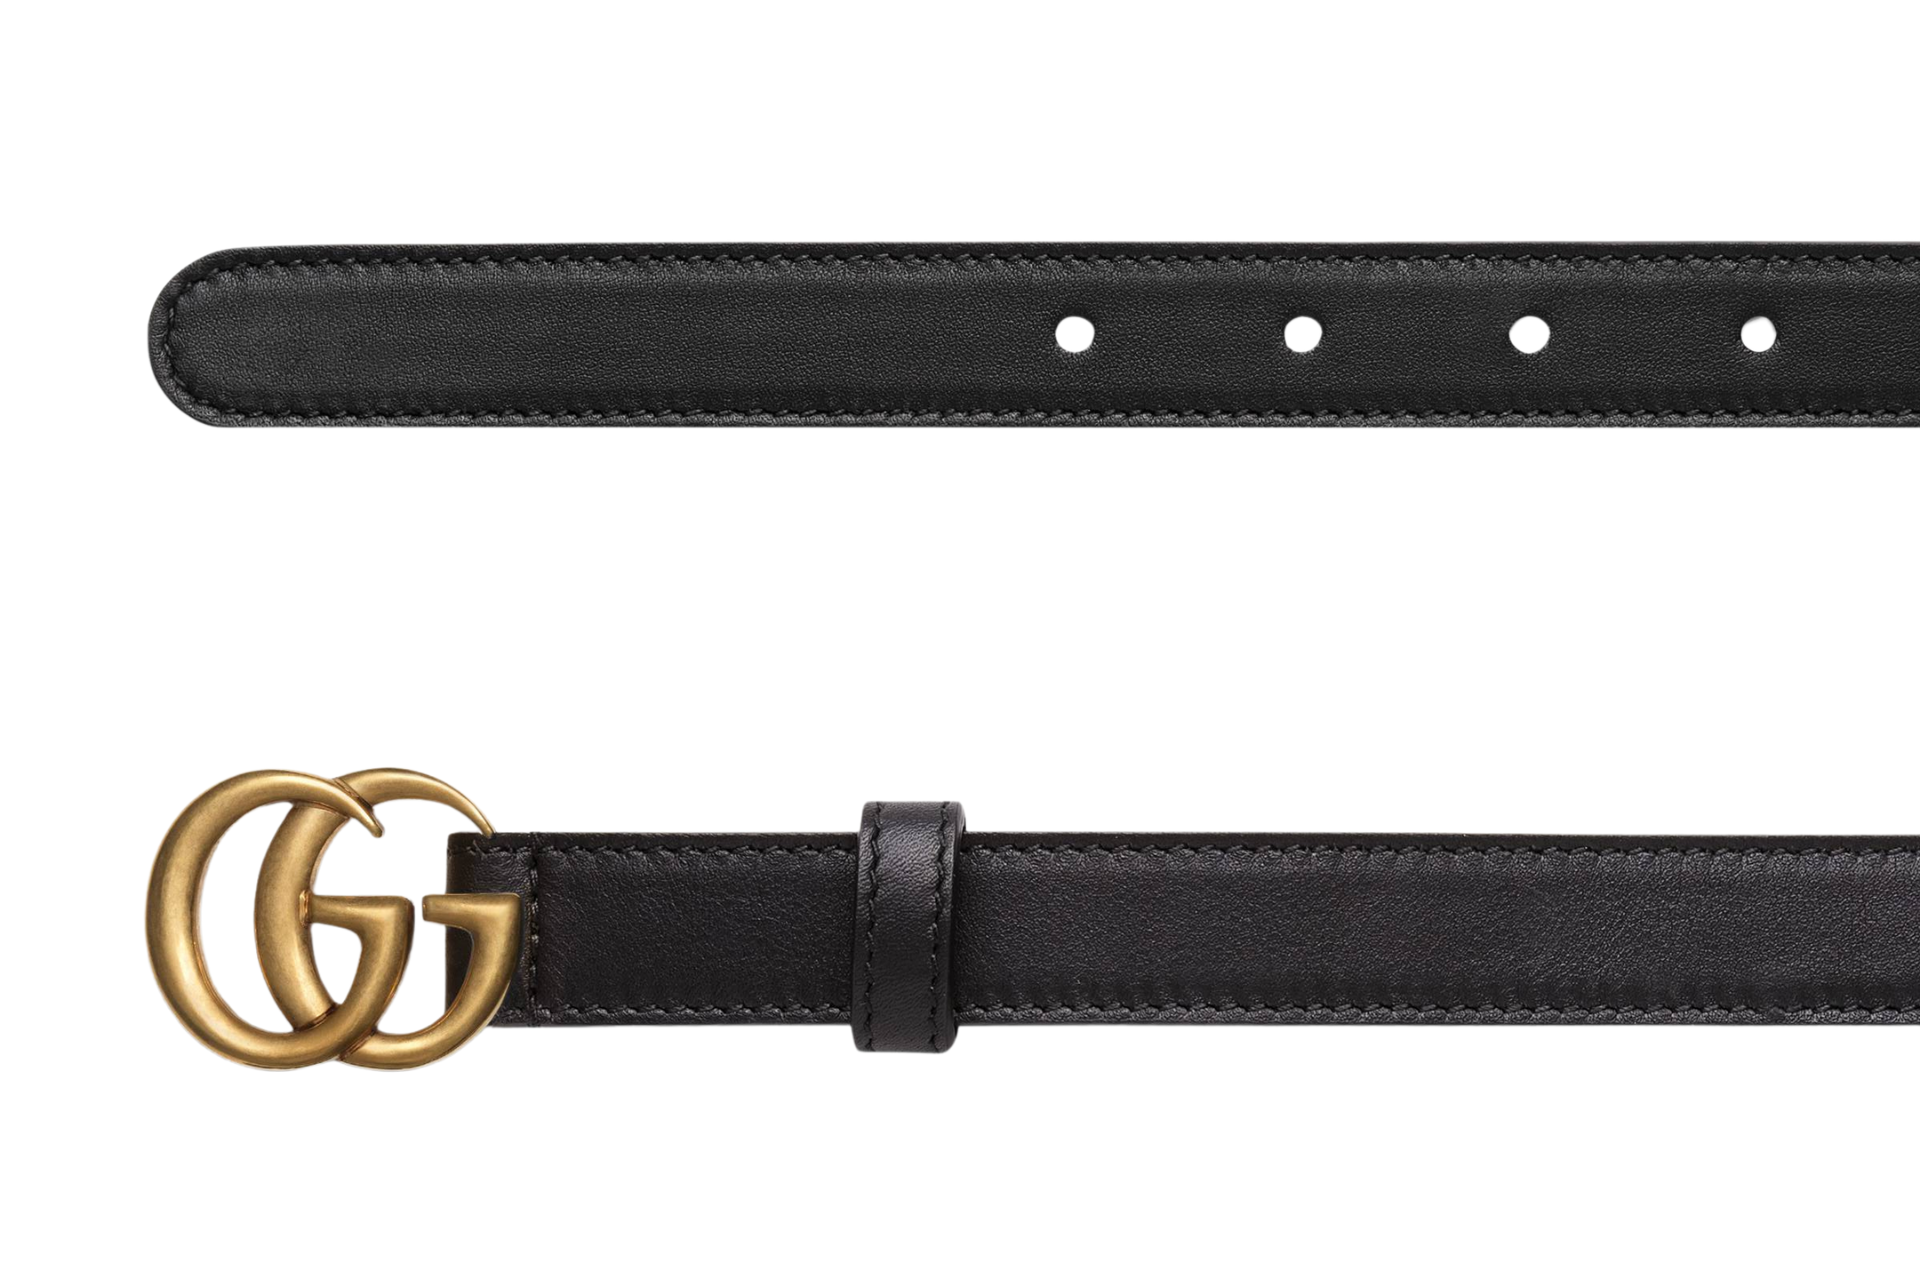 Gucci Slim Leather Belt with Double G Buckle 85 cm